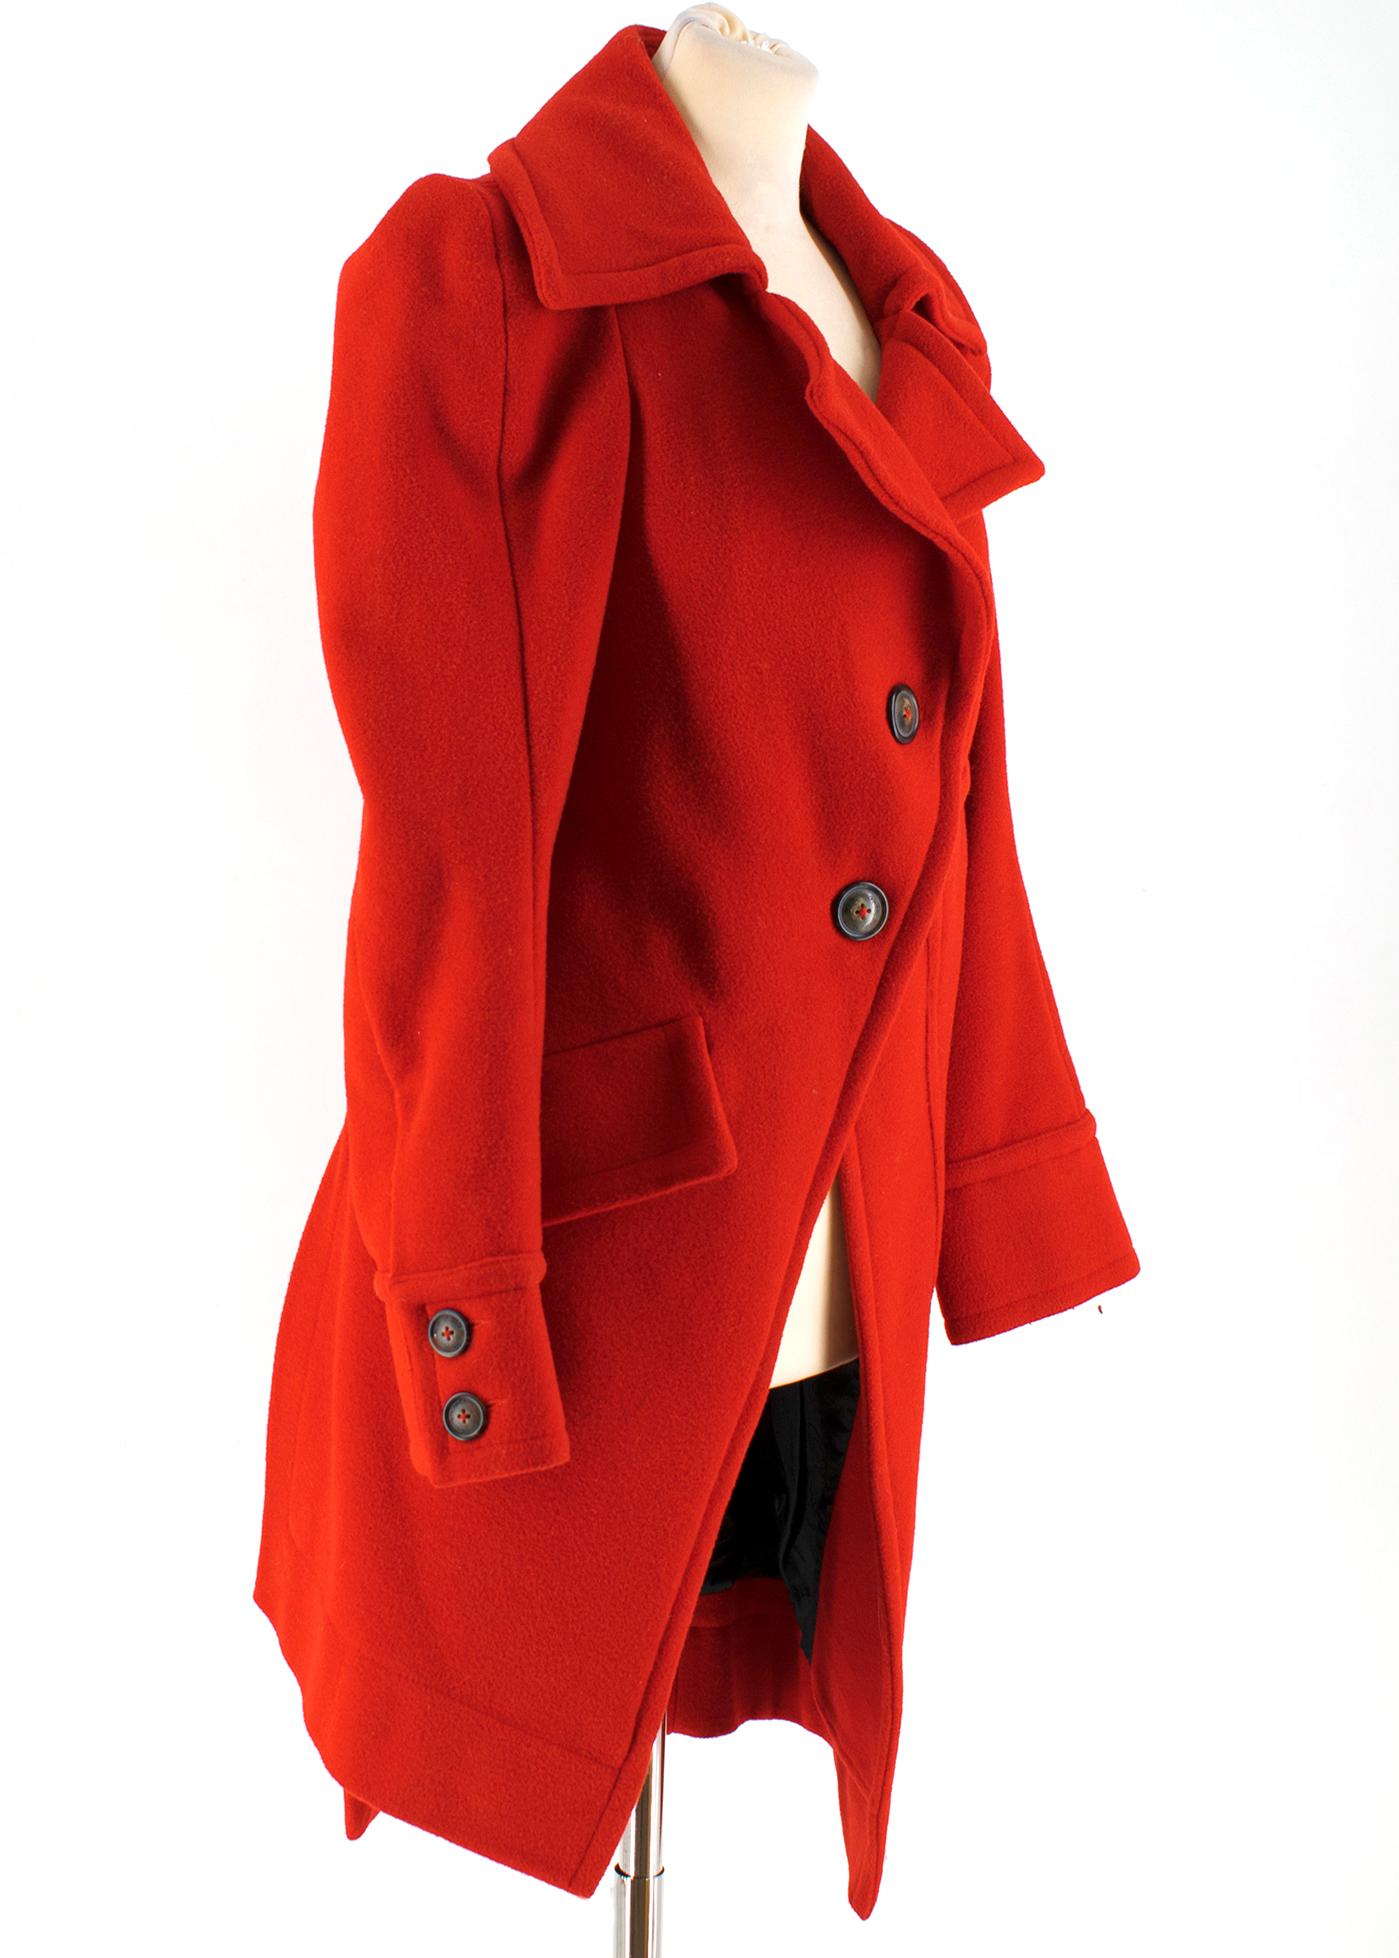 Vivienne Westwood Anglomania Red Wool Asymmetric Coat

Soft, wool coat in deep red,
Long sleeves,
Front button fastenings,
1 front flap pocket,
1 front slant pocket,
Side vent,
Mid-weight

Please note, these items are pre-owned and may show some